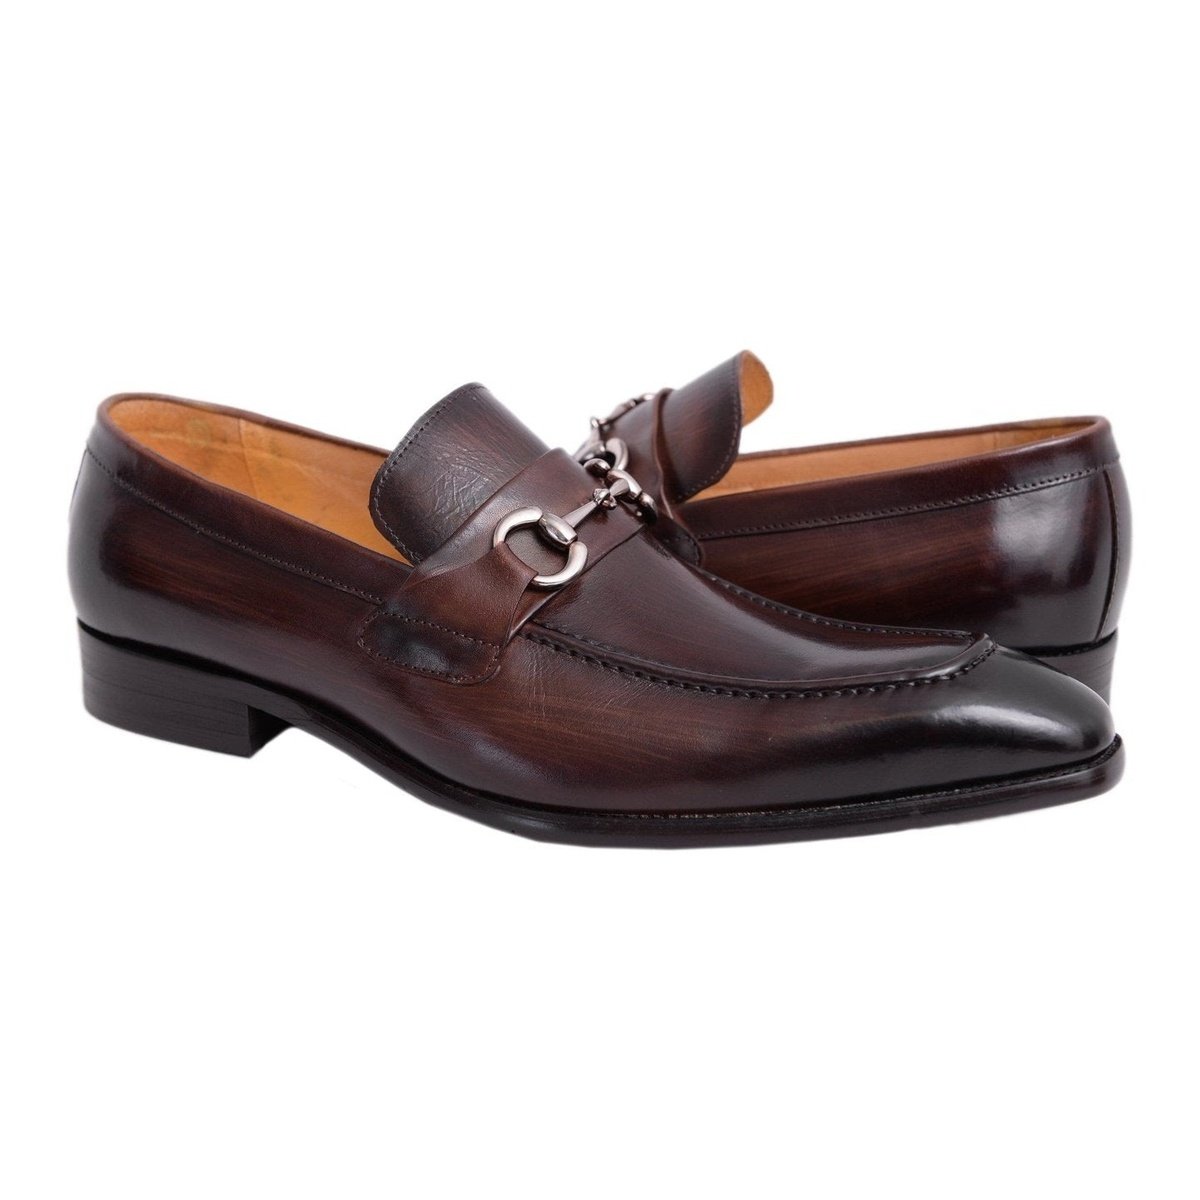 Carrucci Shoes For Amazon 8.5 D-M Carrucci Brown Slip-on Loafer Apron Toe Leather Dress Shoes Decorative Buckle